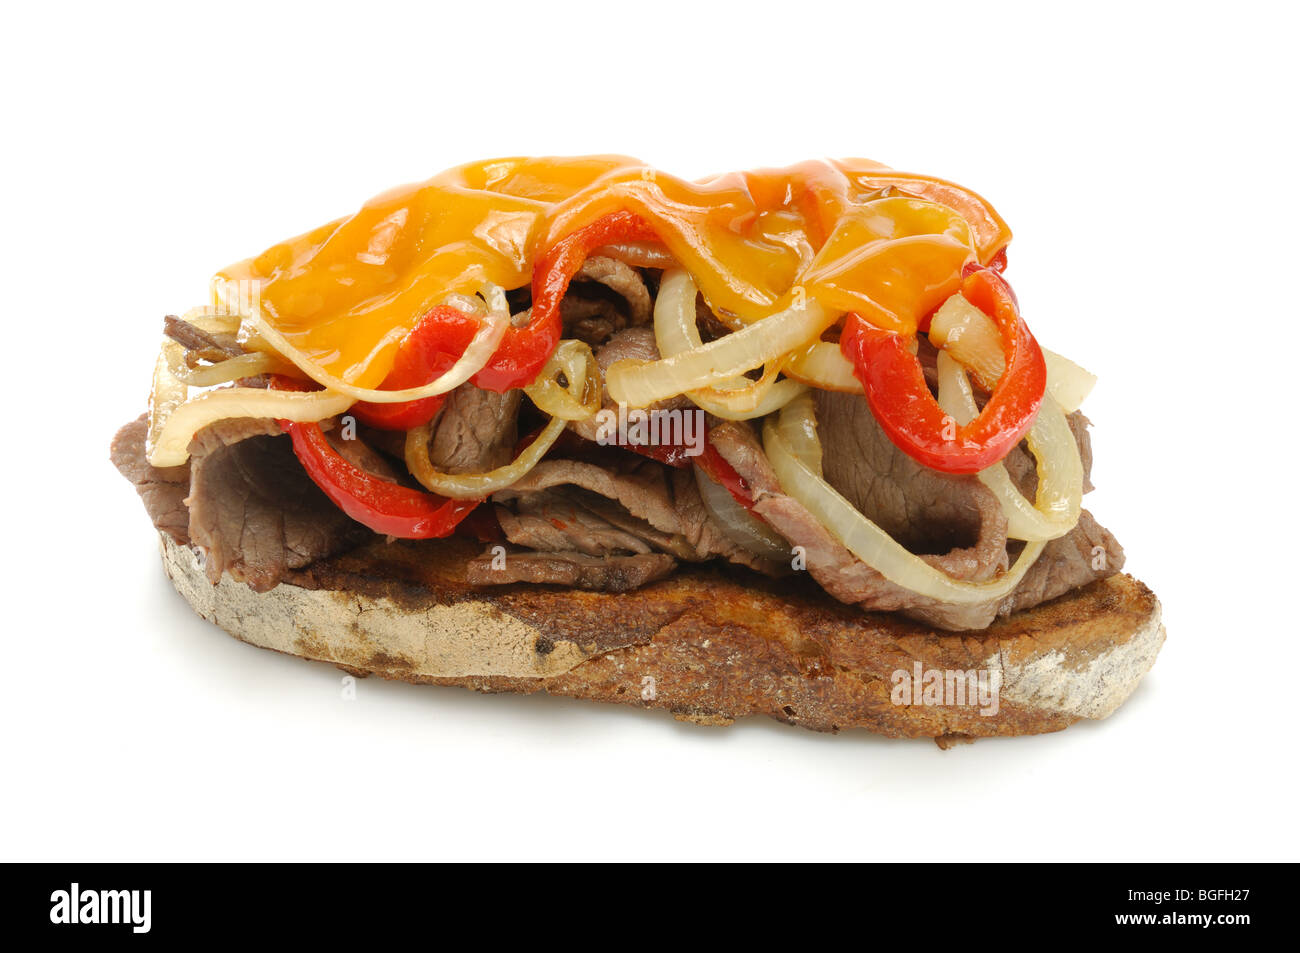 An opened faced meat sandwich with onions, red peppers and melted cheese on top Stock Photo